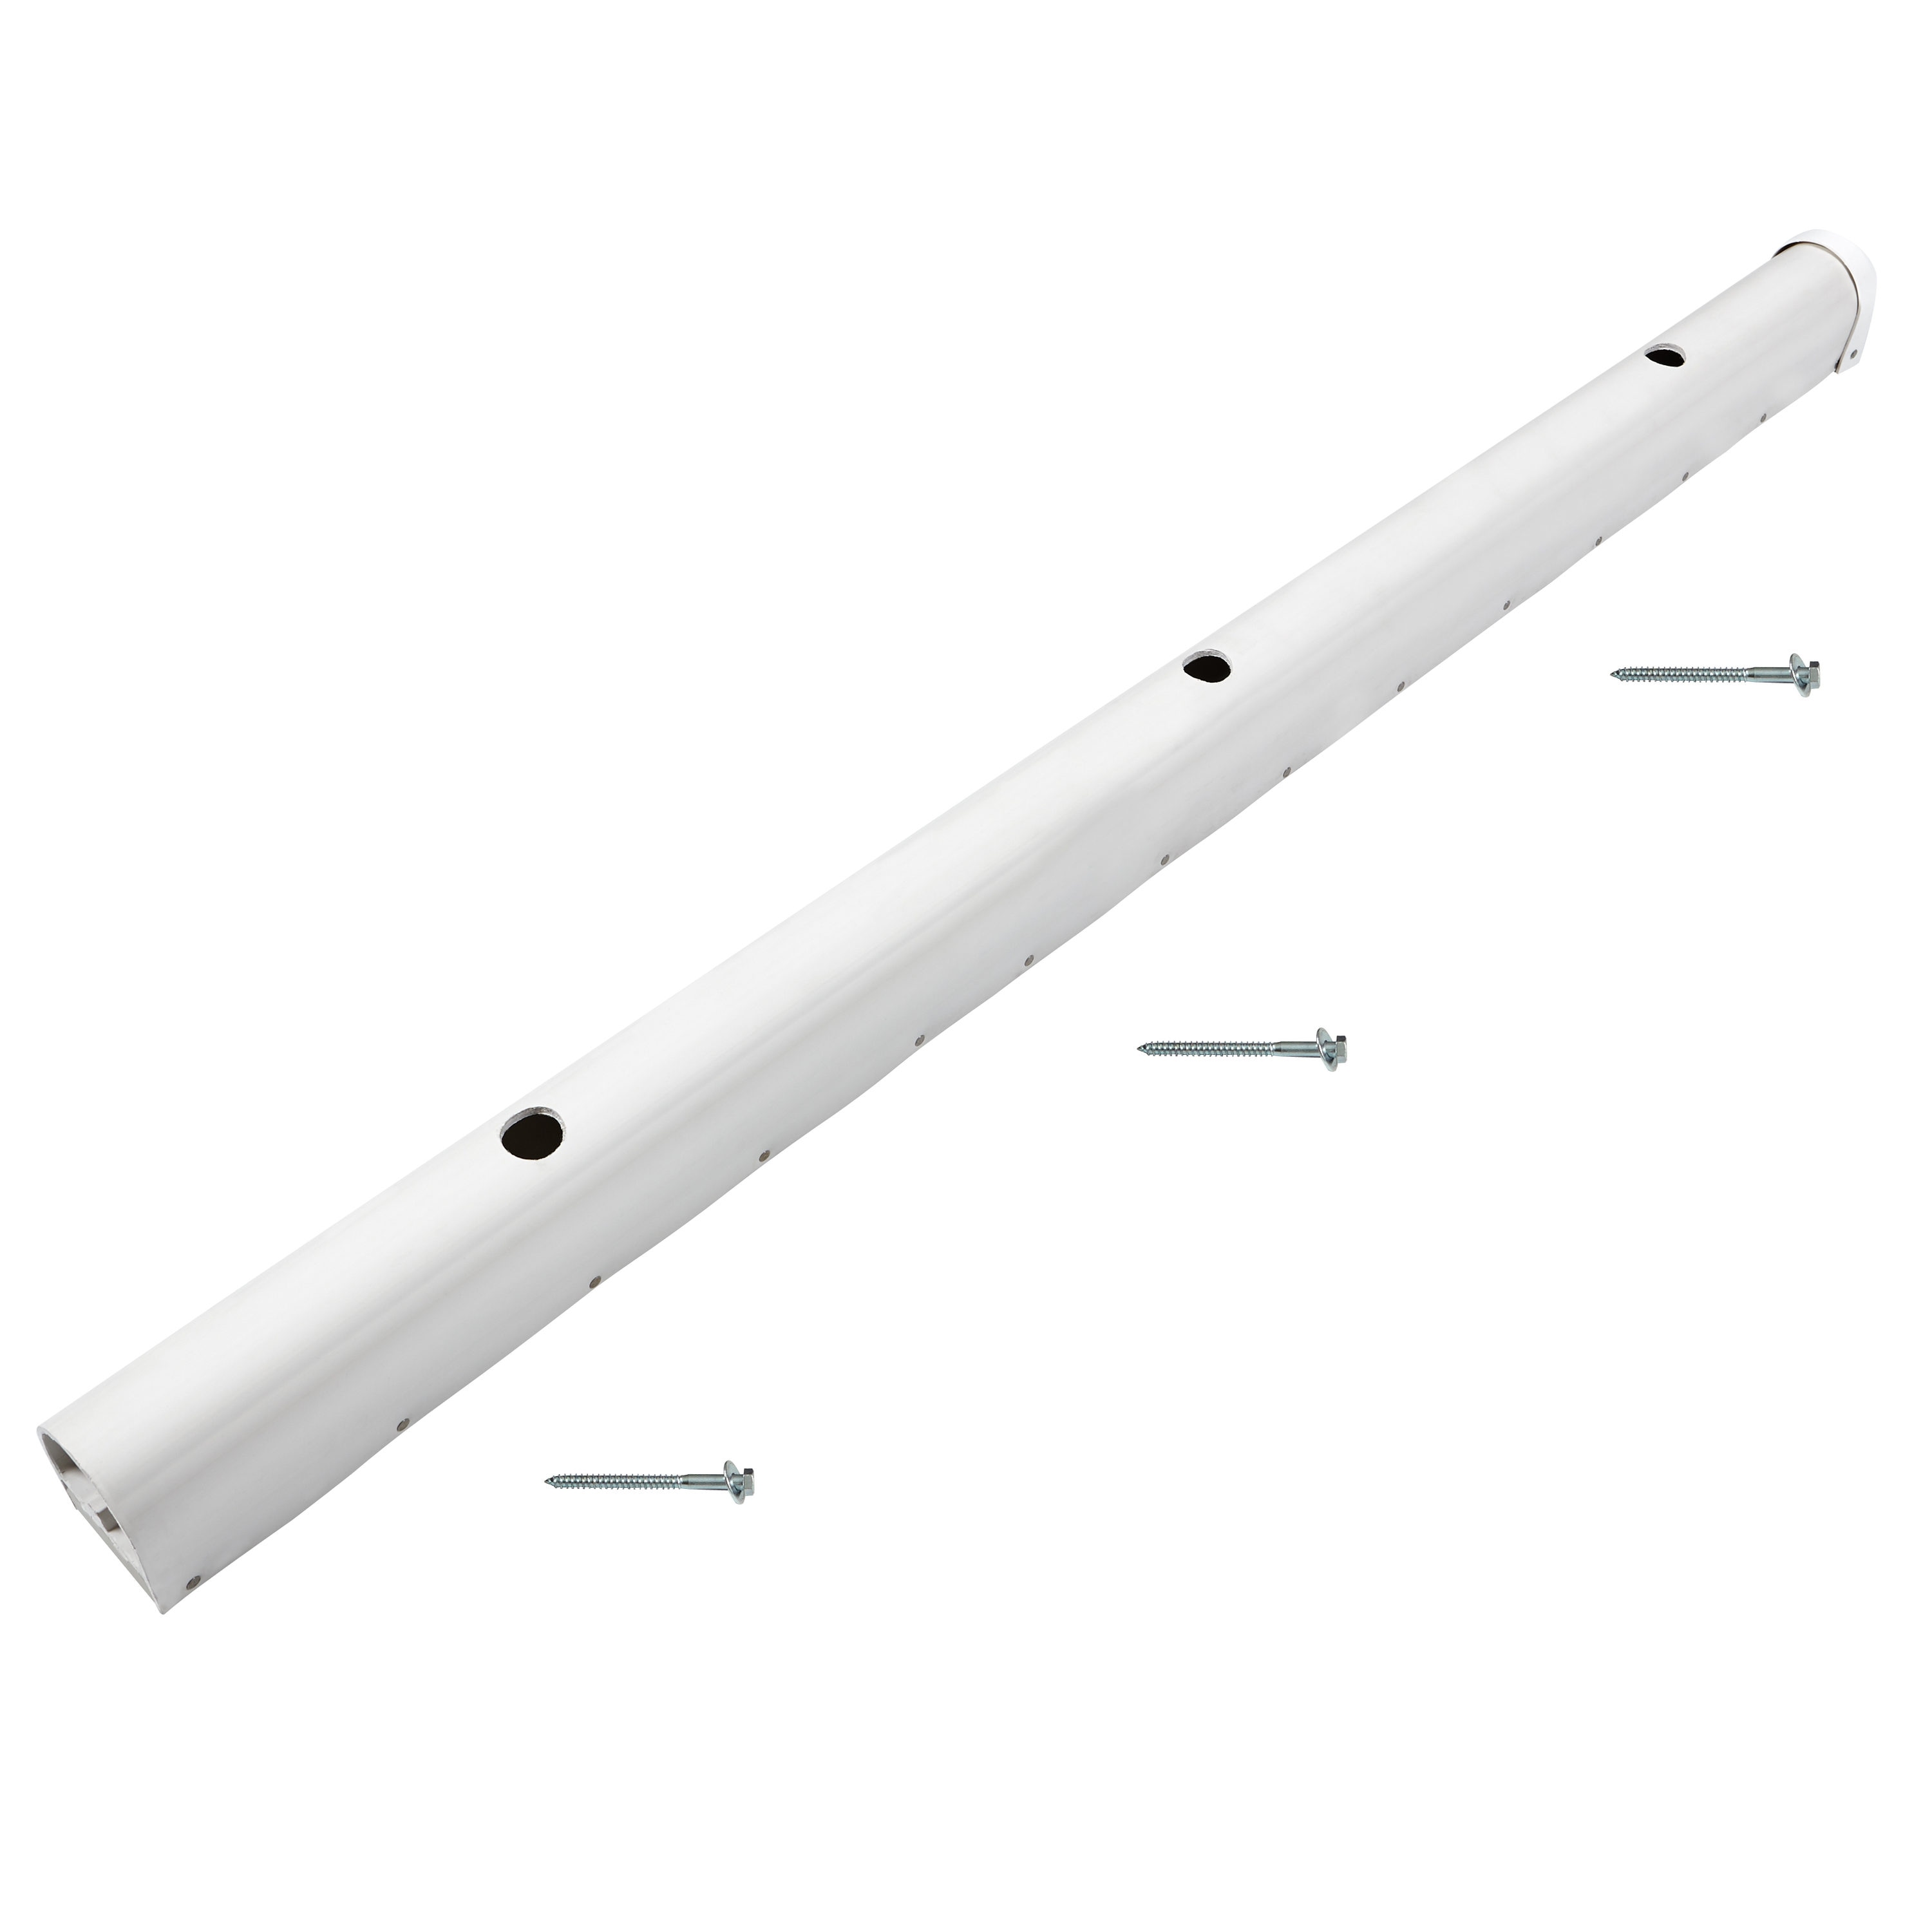 Tommy Docks 72 Inch Heavy Duty PVC Piling Bumper with Fastener - White,  Non-Marking, Marine Grade in the Marine Hardware department at